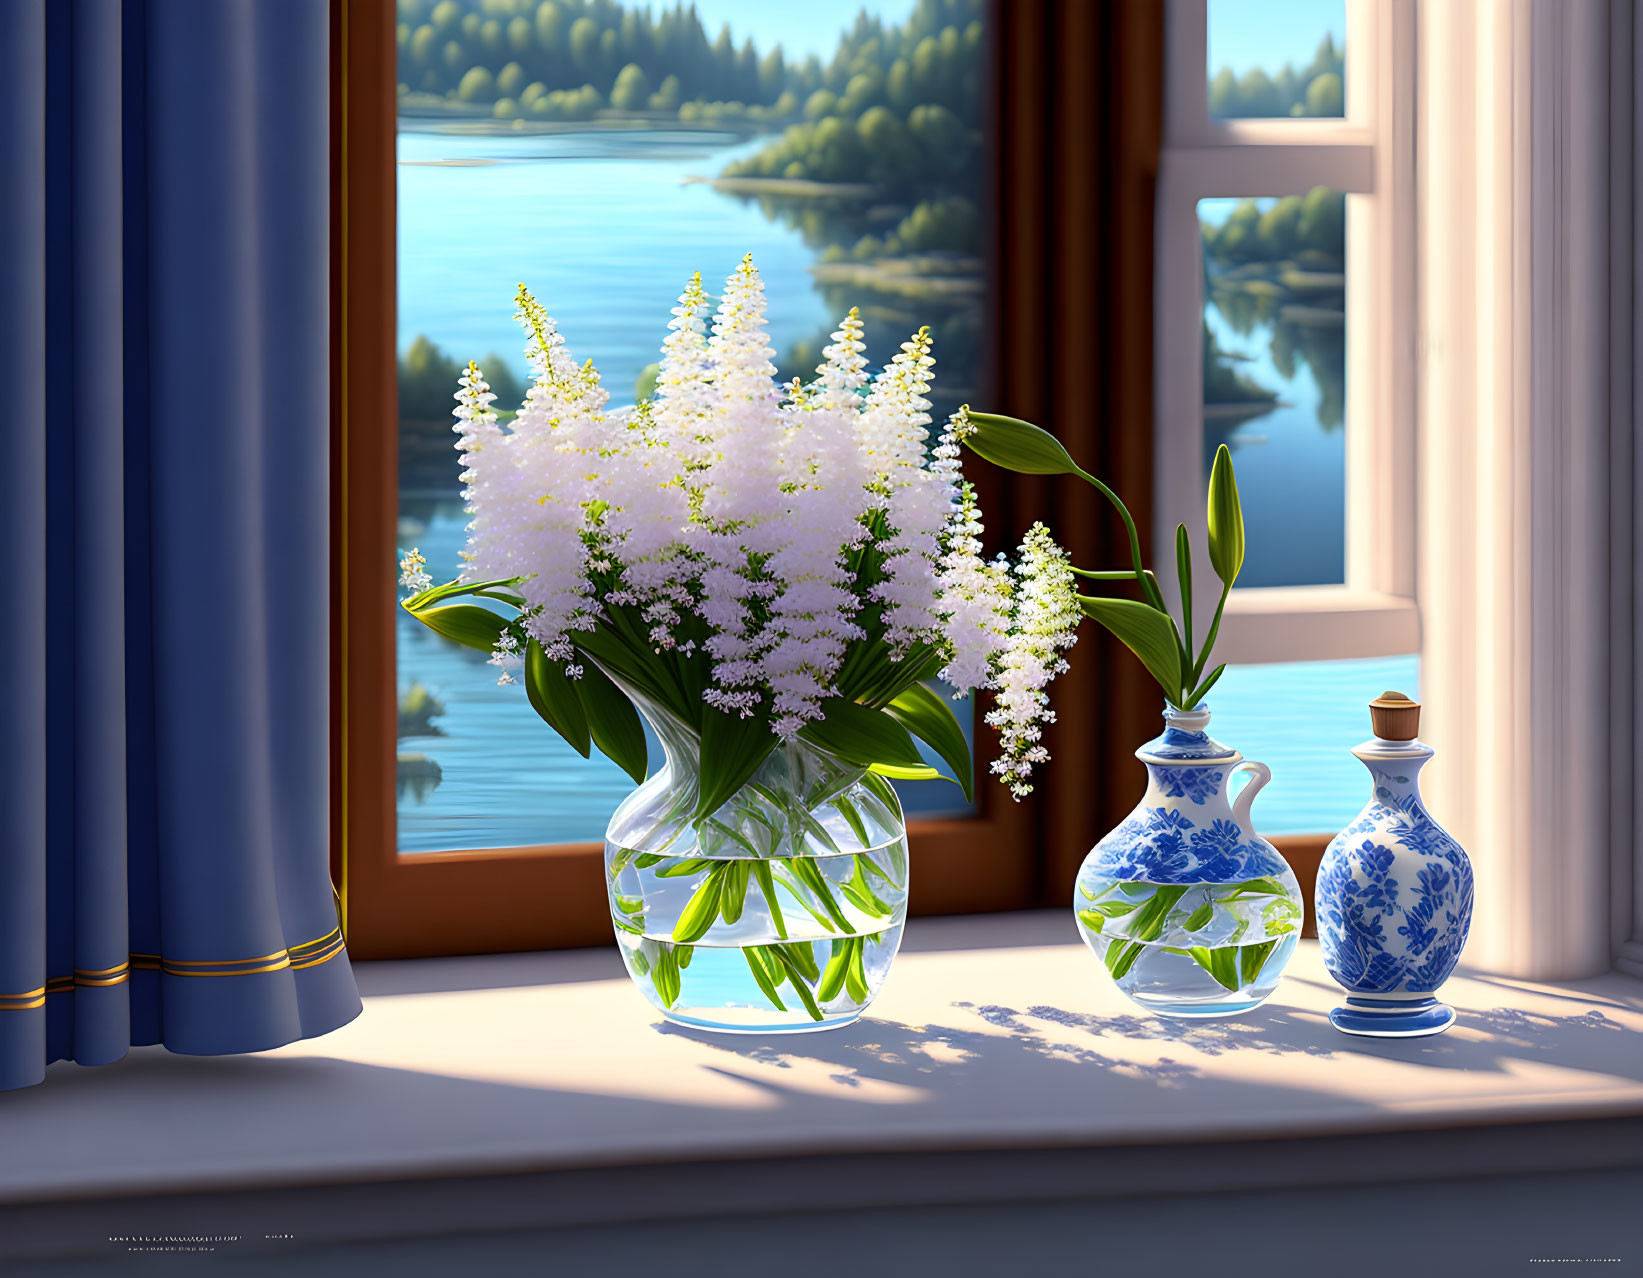 Tranquil lake view with white flowers and blue porcelain vase